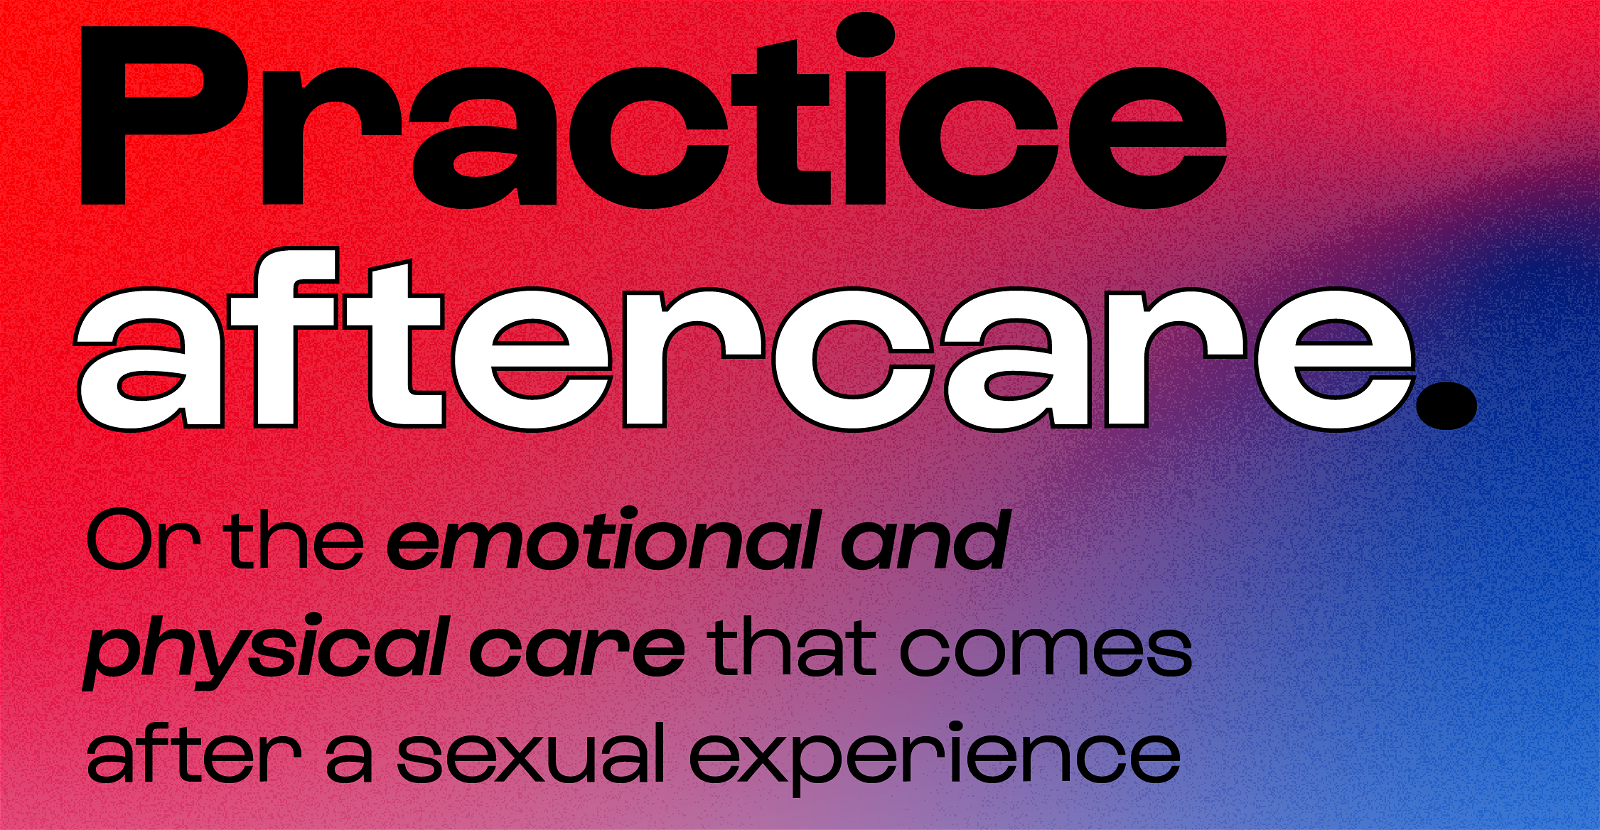 practice aftercare or the emotional and physical care that comes after a sexual experience